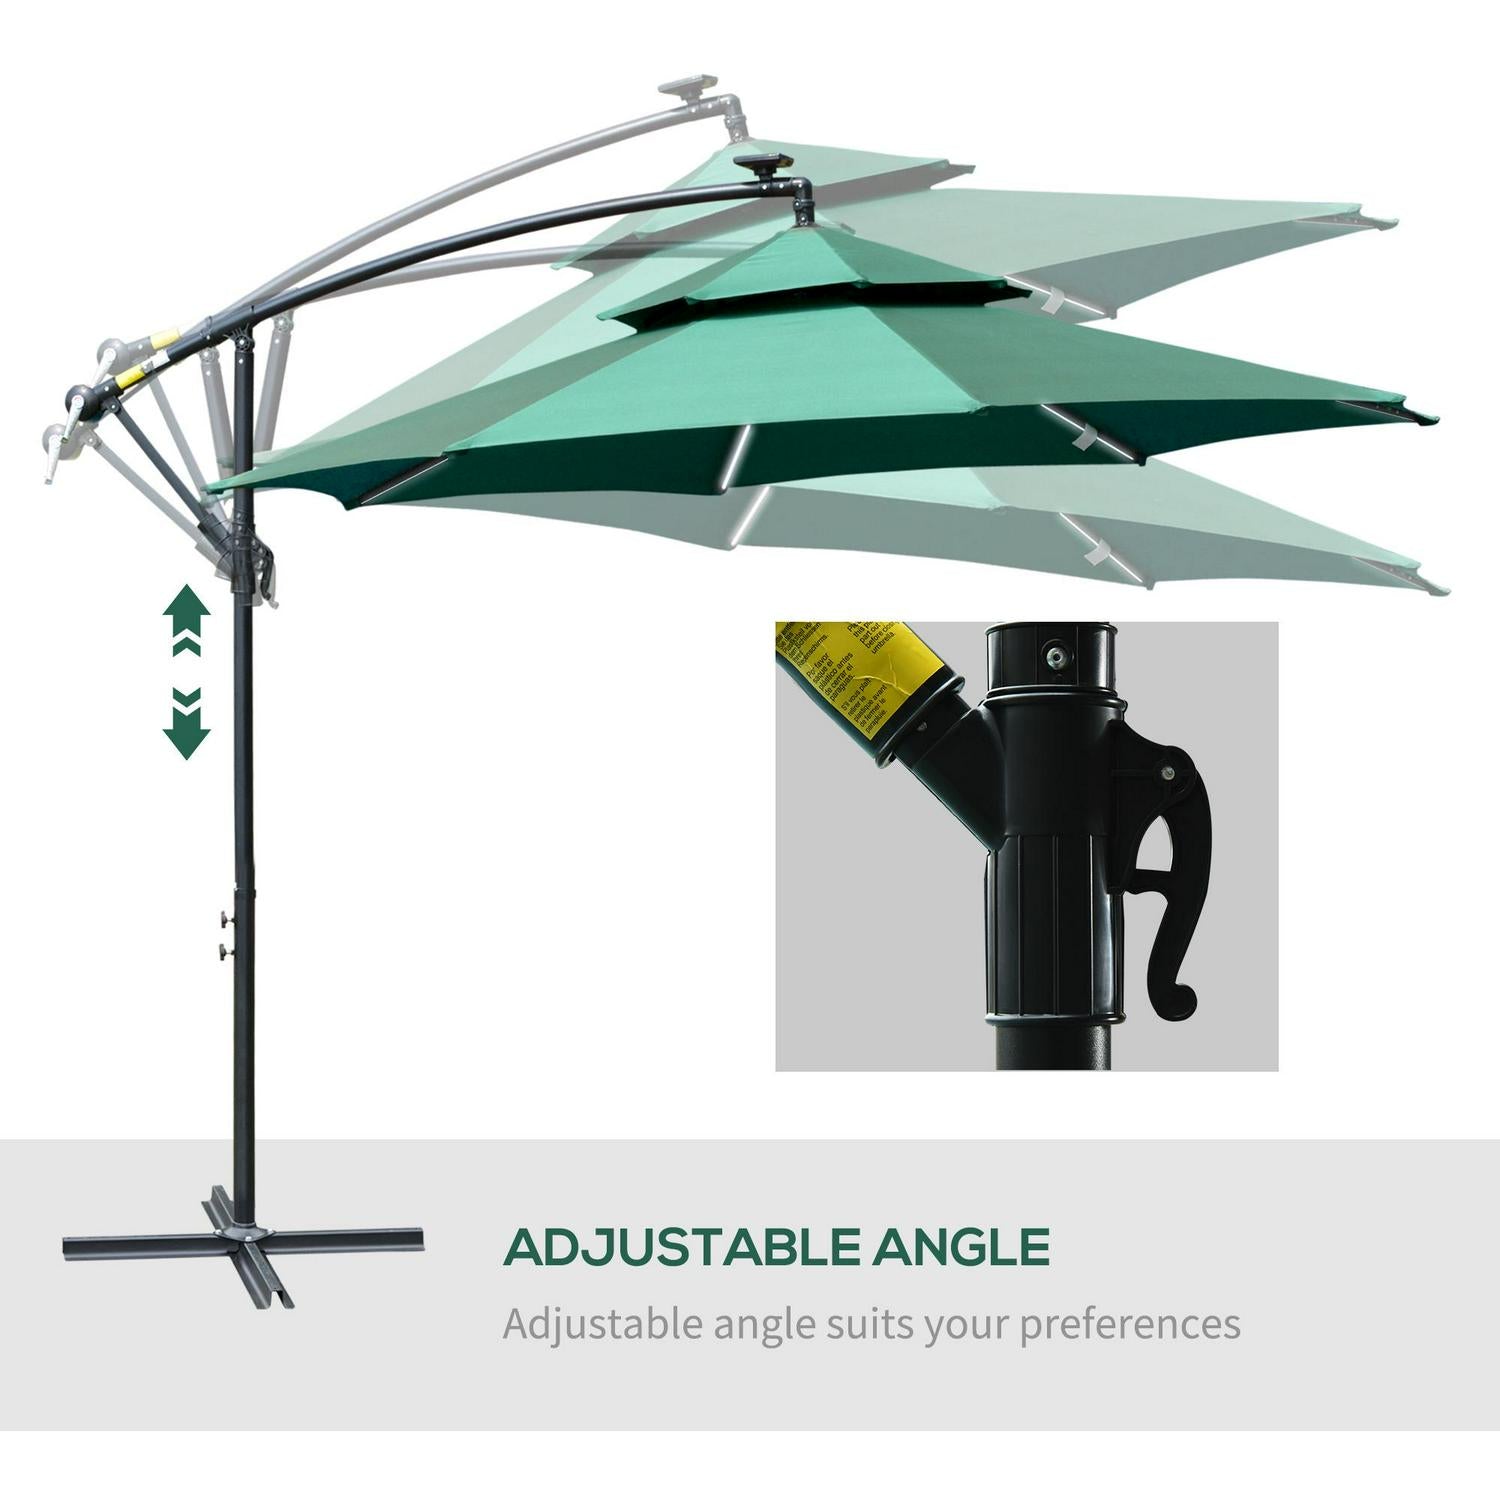 Cantilever Banana Parasol Hanging Umbrella With Double Roof- Green